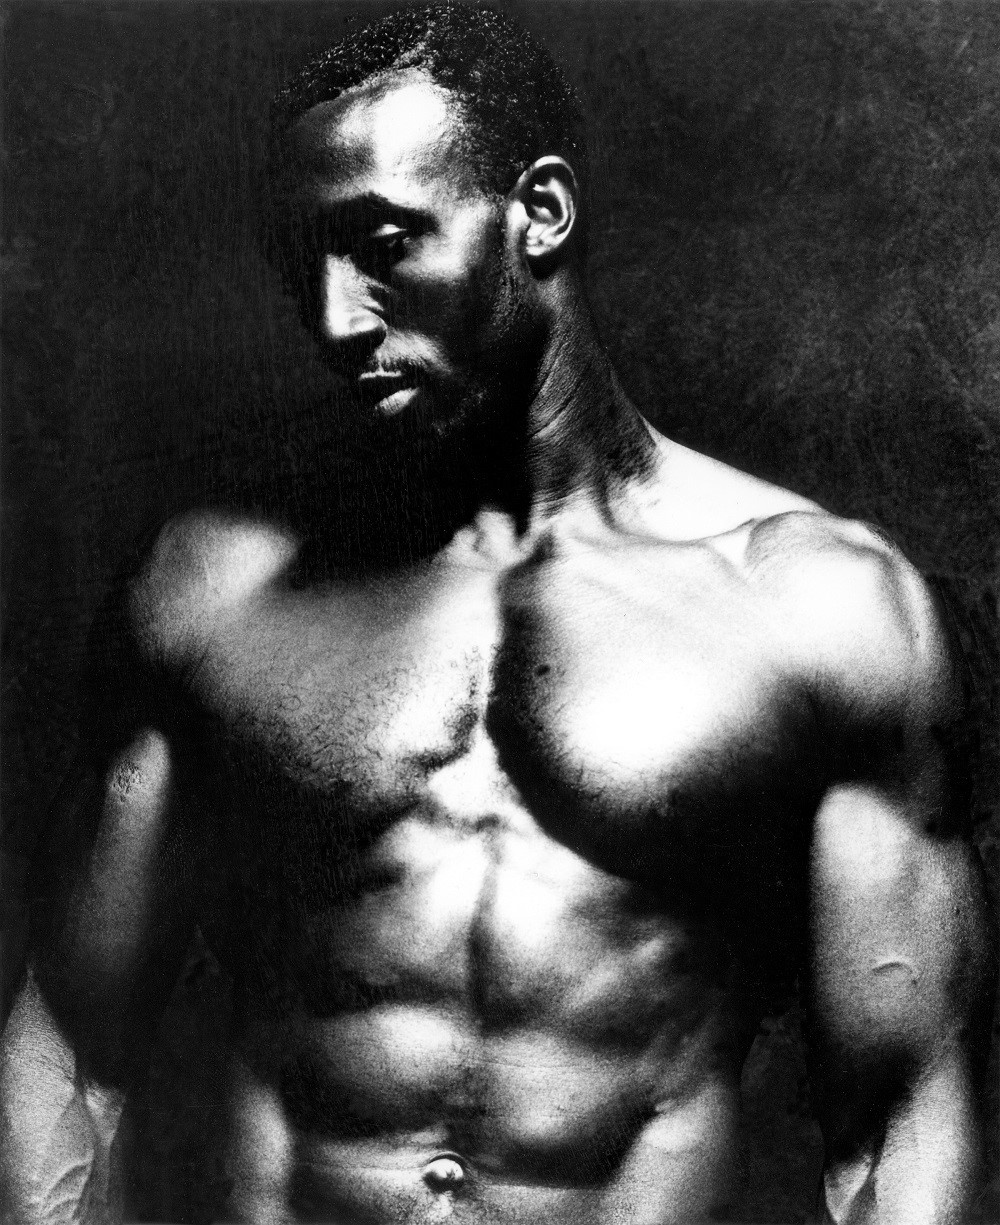 Linford Christie by Alistair Morrison in 1996 (